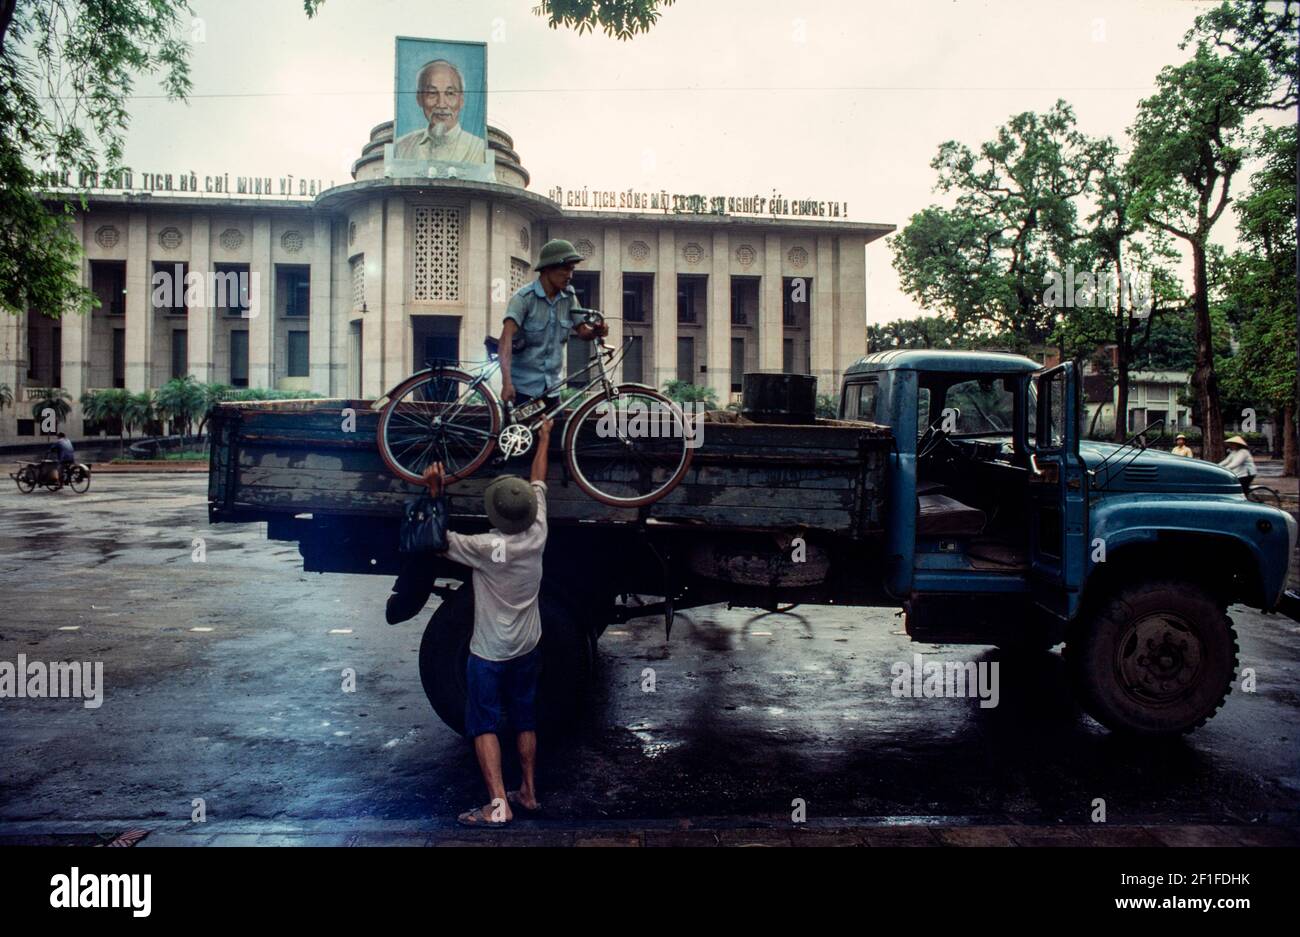 Unloading a bike from a truck outside a government building, Hanoi, North Vietnam, June 1980 Stock Photo